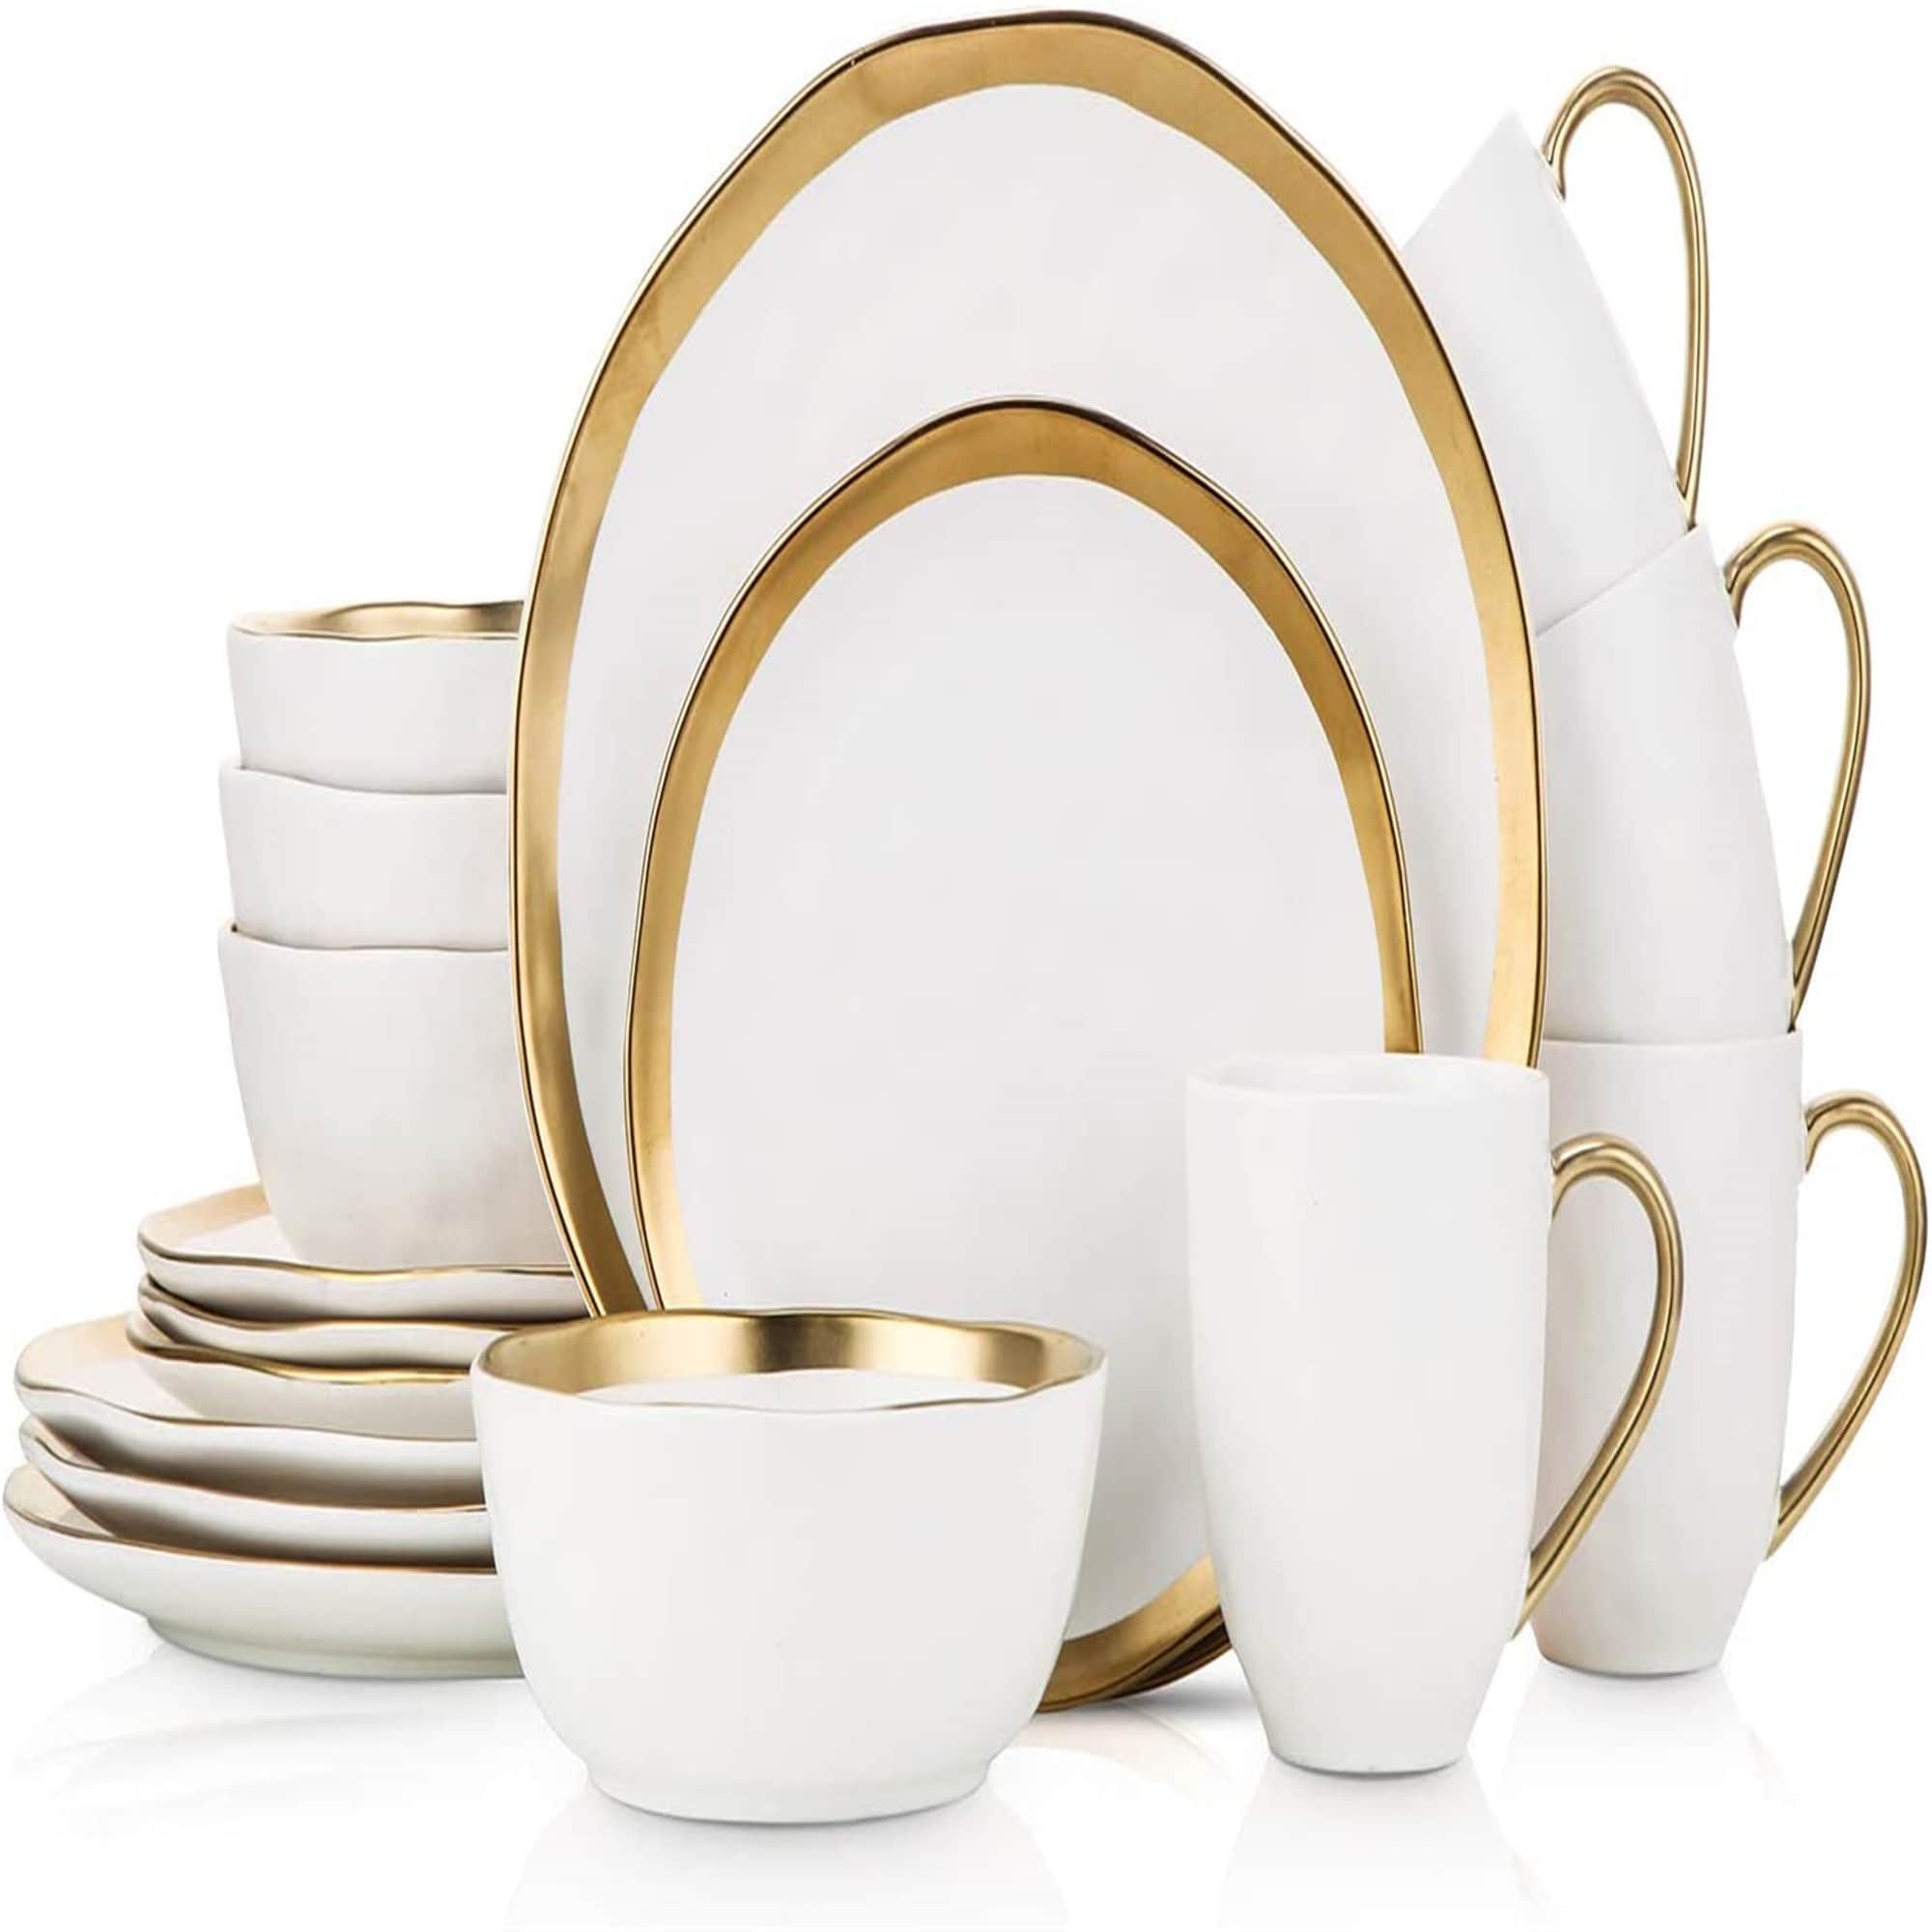 https://ak1.ostkcdn.com/images/products/is/images/direct/a288527f461eab678349c2a9059c68efd95b76f5/Stone-Lain-Porcelain-16-Piece-Dinnerware-Set%2C-Service-for-4%2C-Black-and-Golden-Rim.jpg